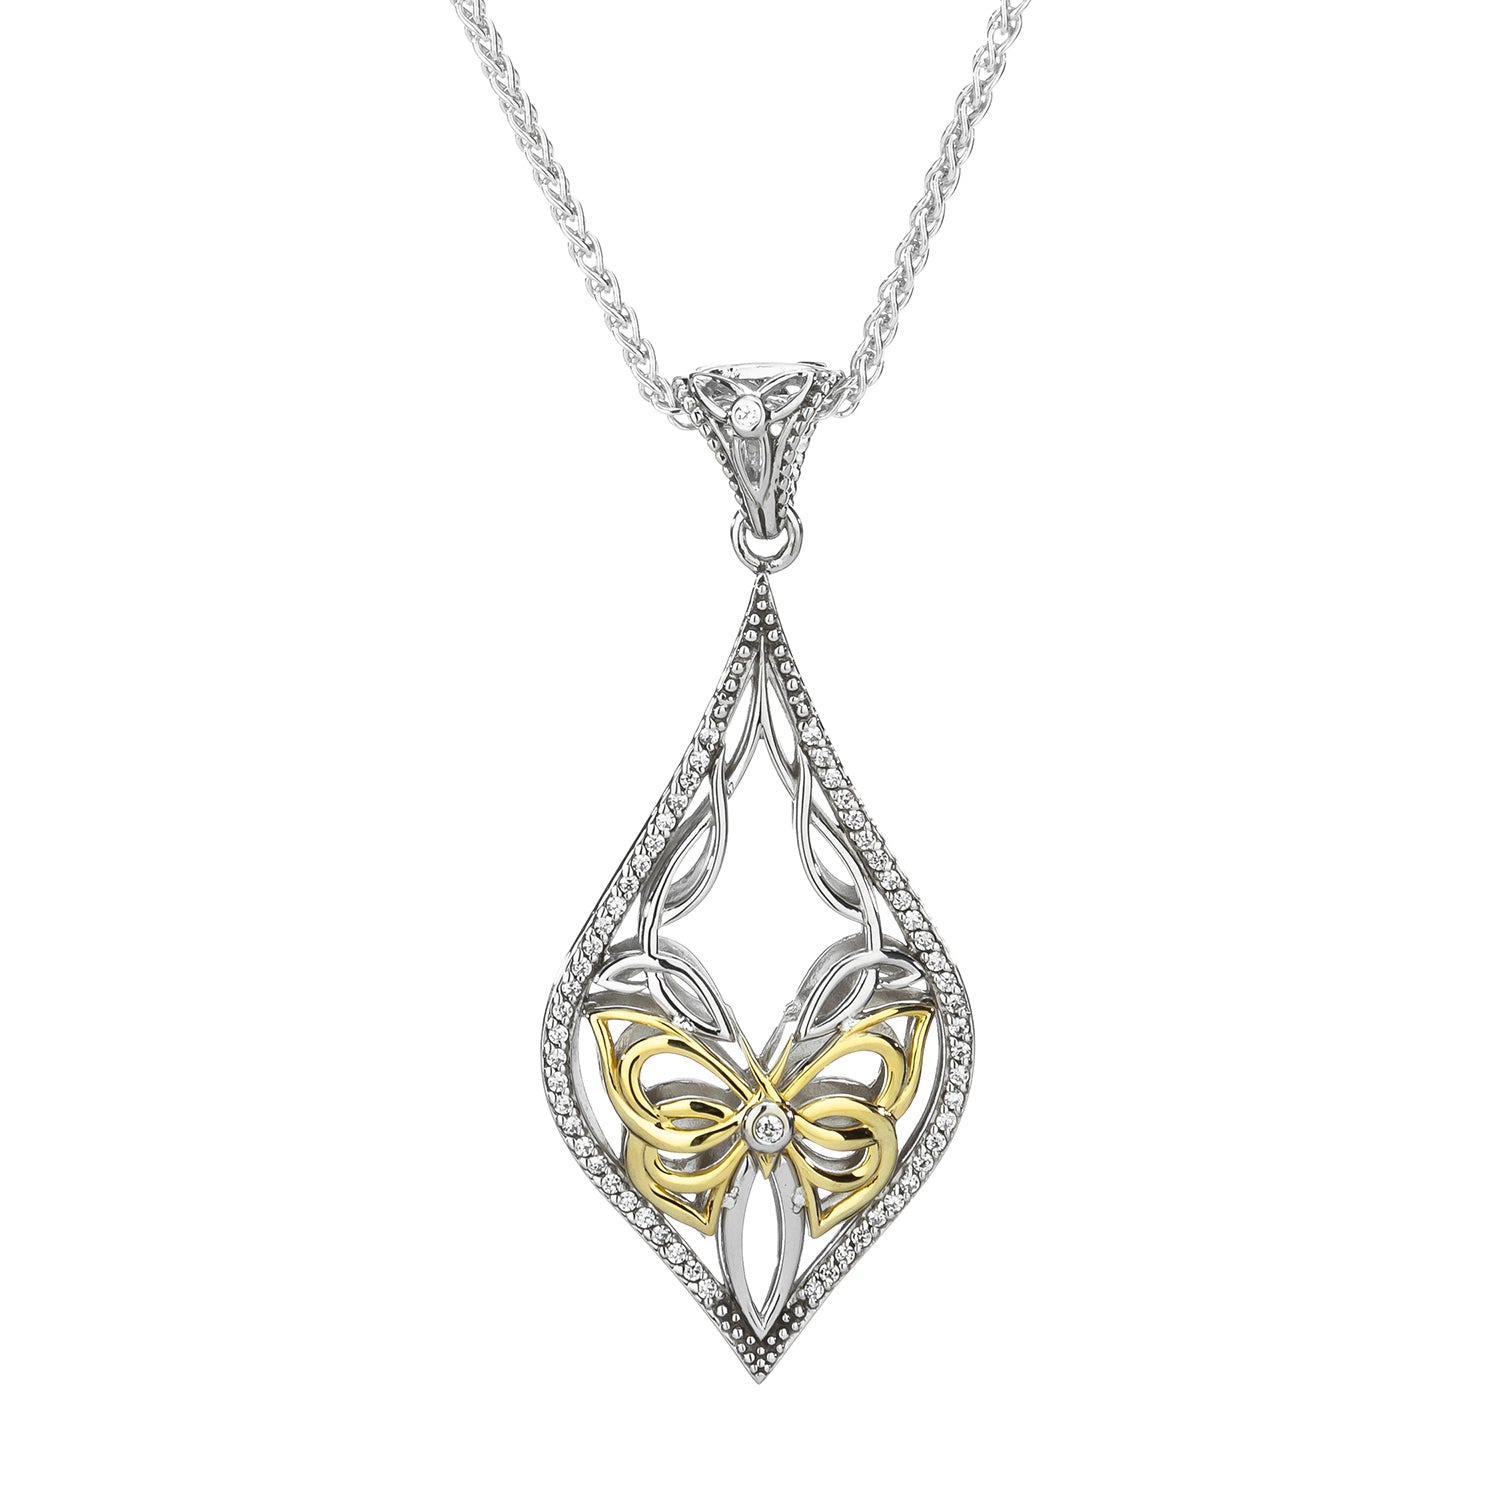 Pendant 10k White CZ Cocooned Butterfly Pendant from welch and company jewelers near syracuse ny 